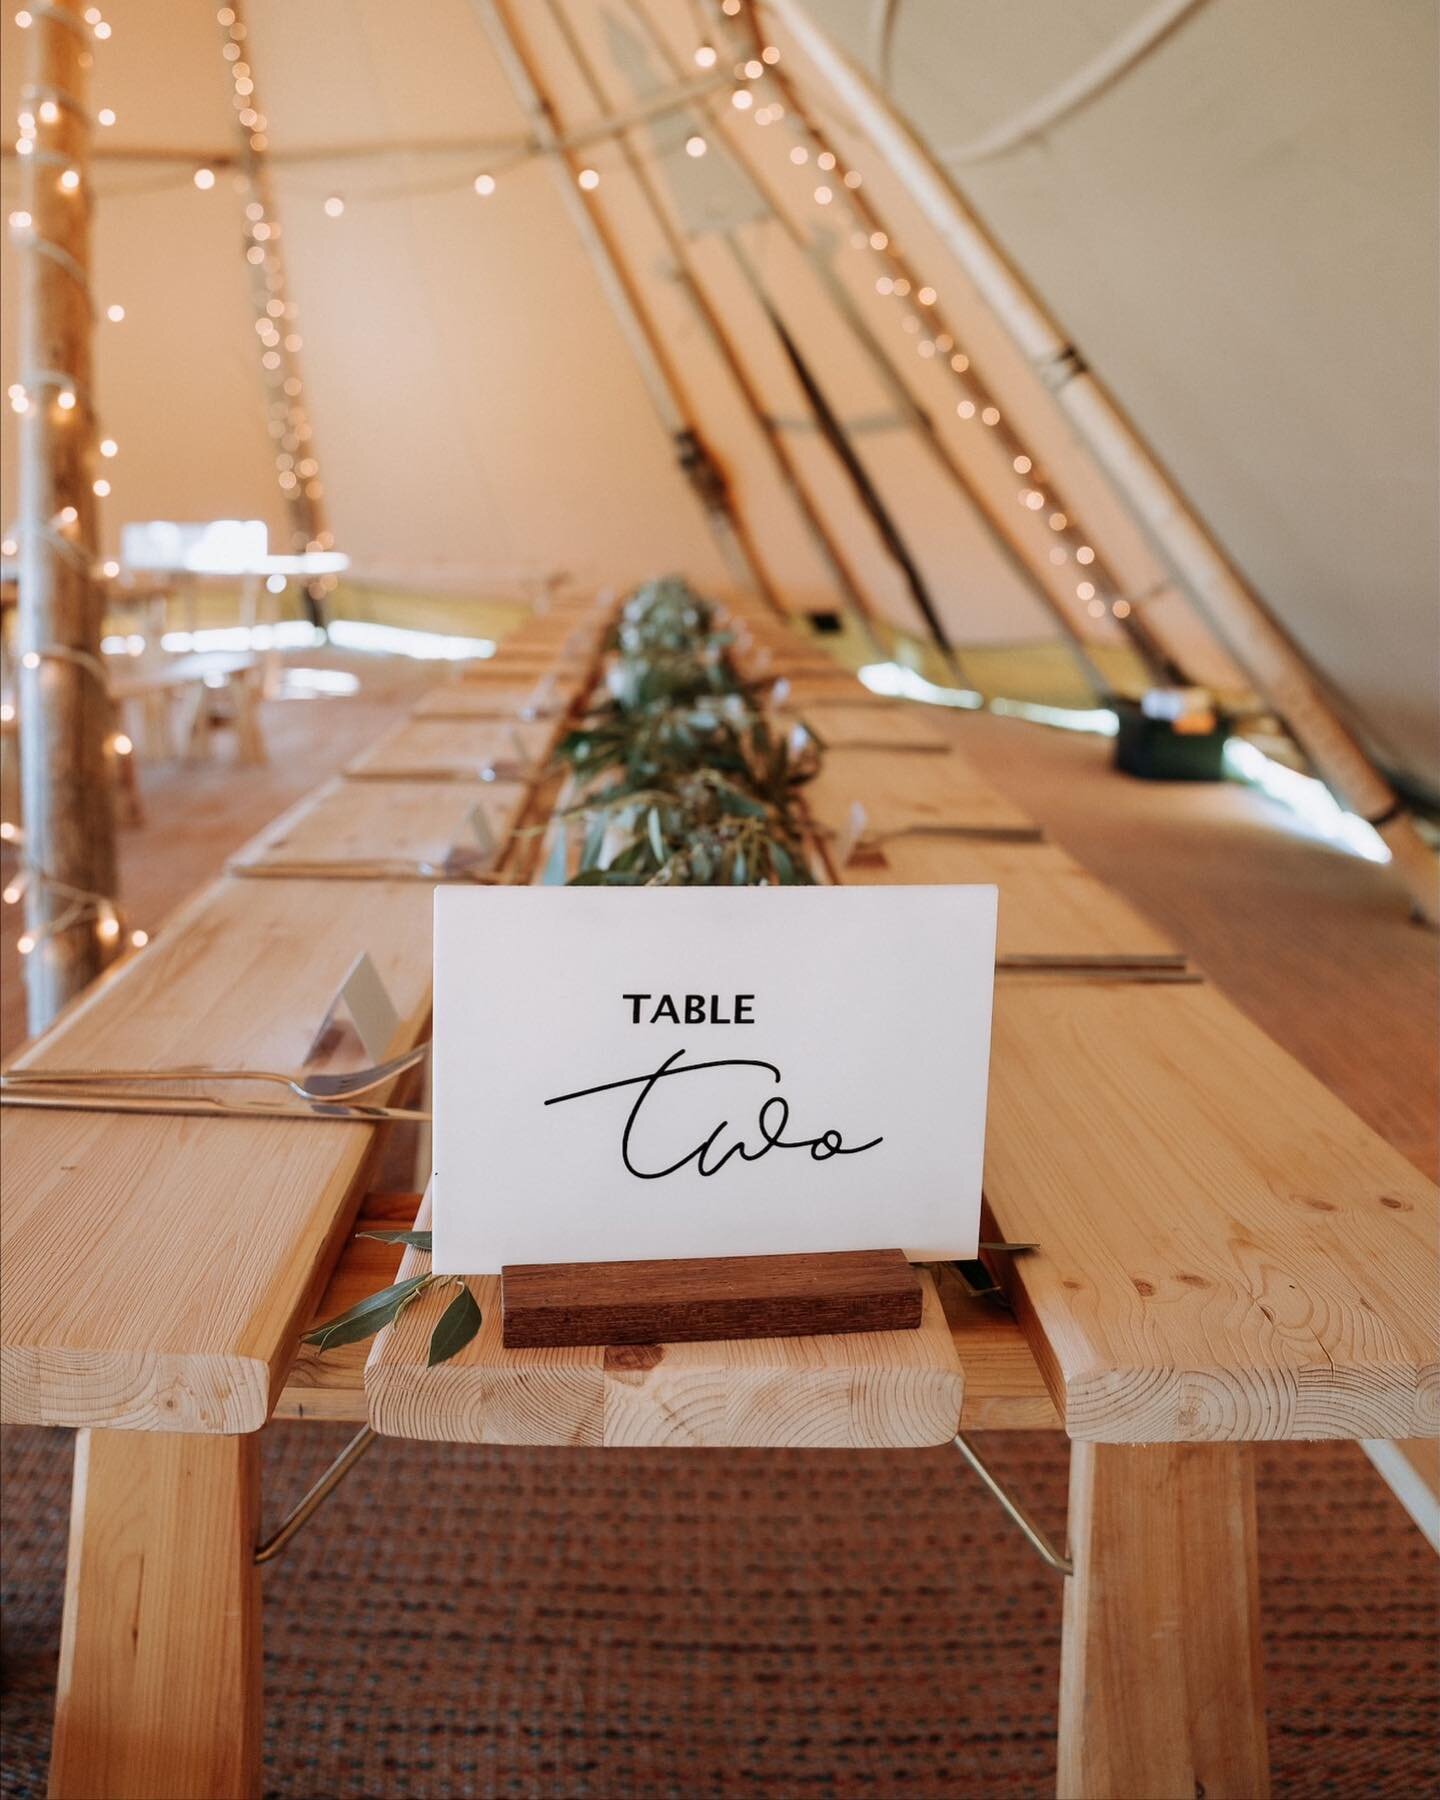 Don&rsquo;t forget about the little details that can make a huge difference 🤍 

Photographer : @katealexandraphoto 

#tablenumbers #weddingsignage ##acrylicsignage #customsignage #centralotagowedding #nzwedding #otagowedding